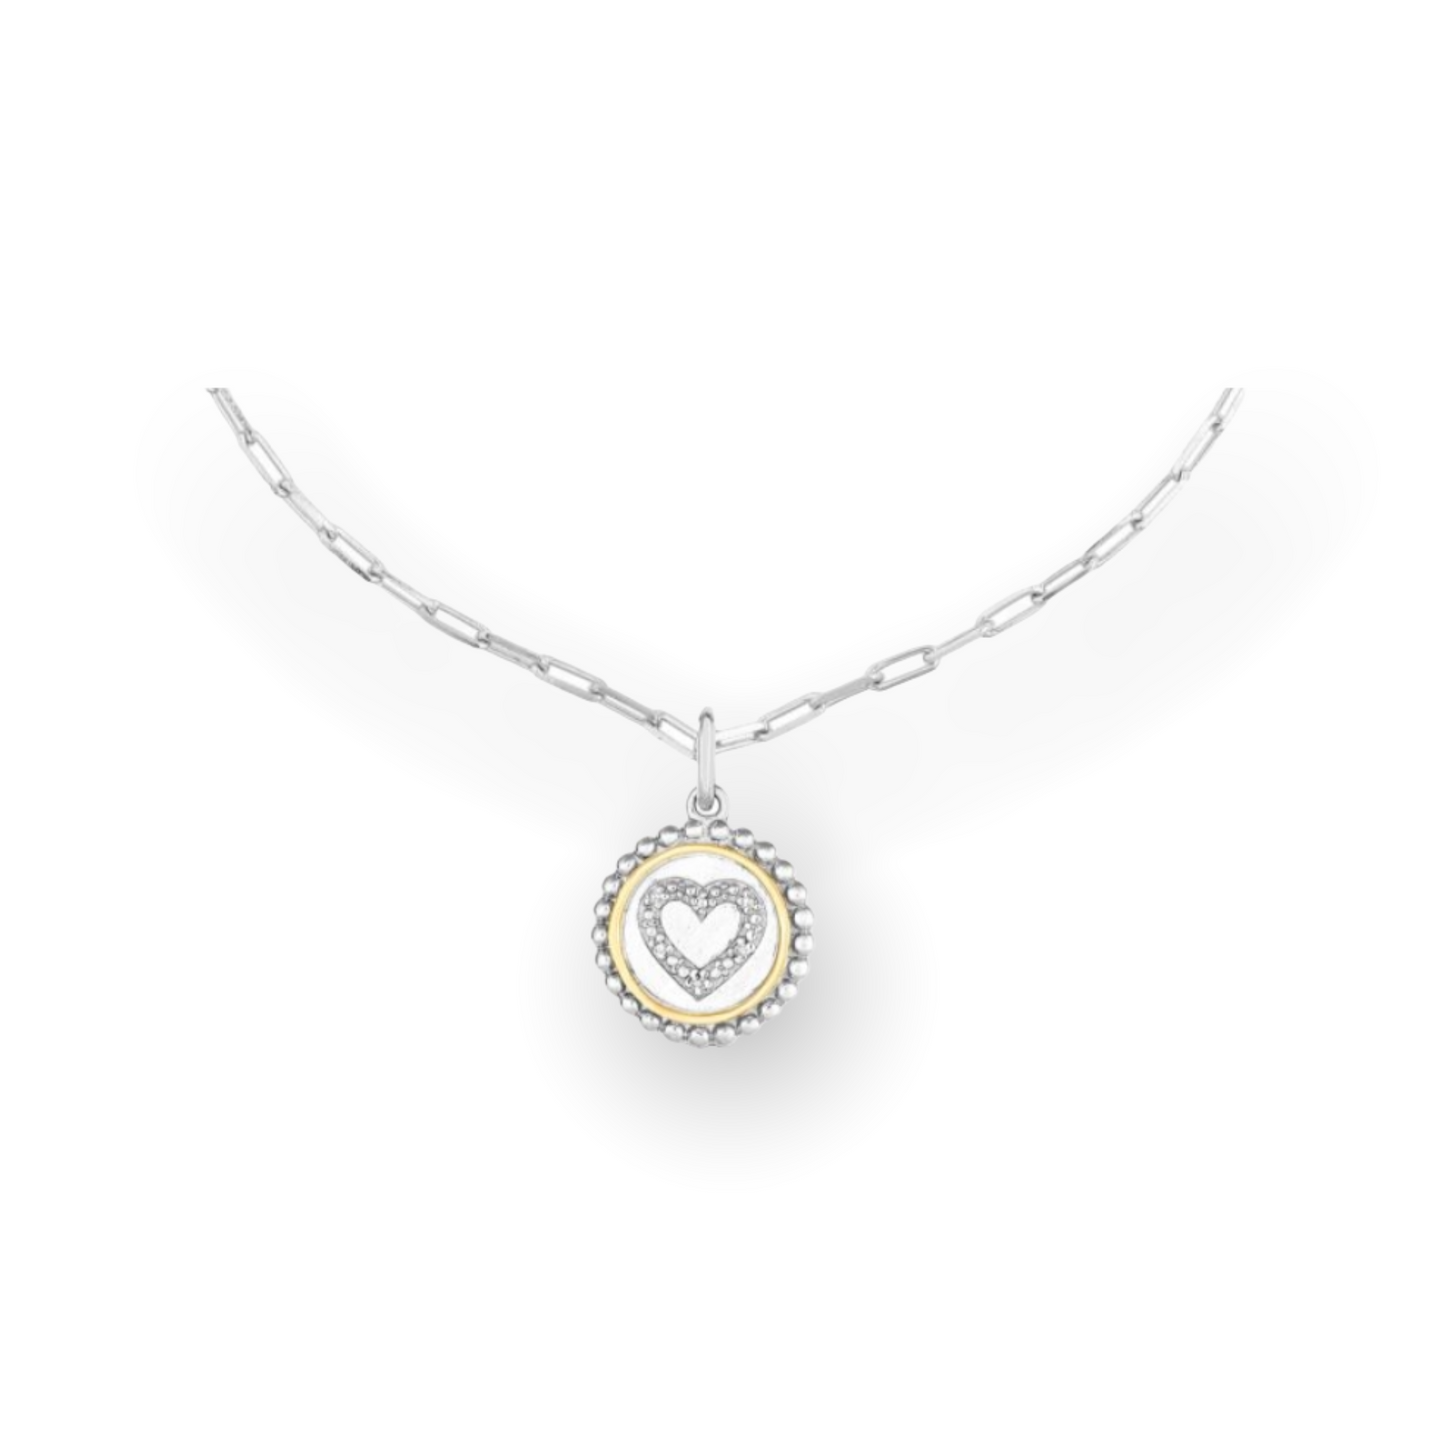 Round Heart Pendant on Paperclip Chain